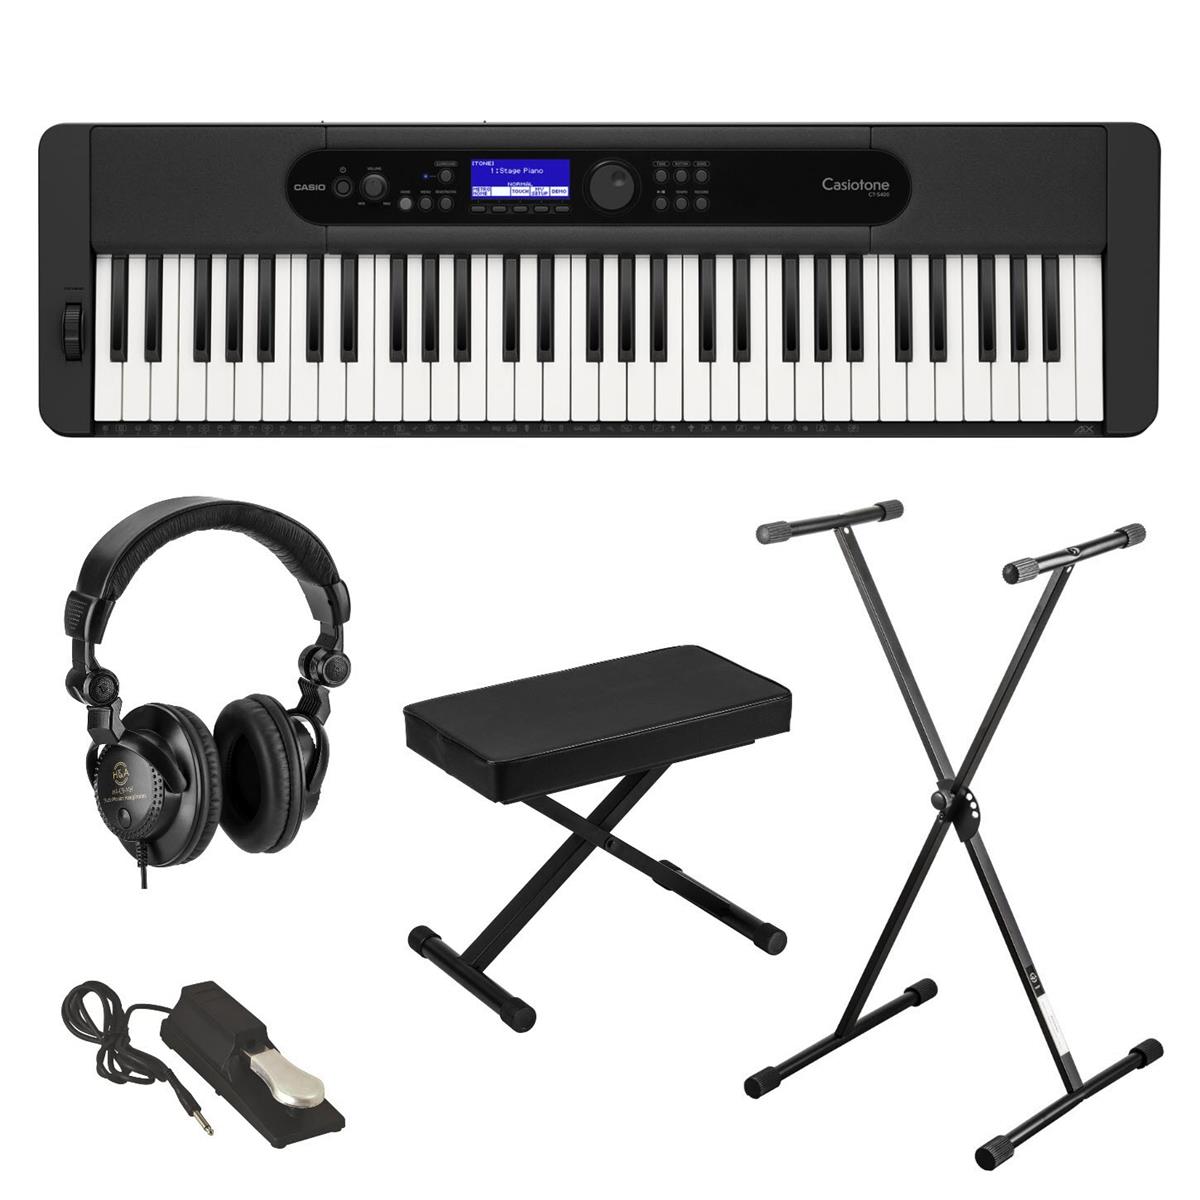 Image of Casio Casiotone CT-S400 61-Key Portable Keyboard